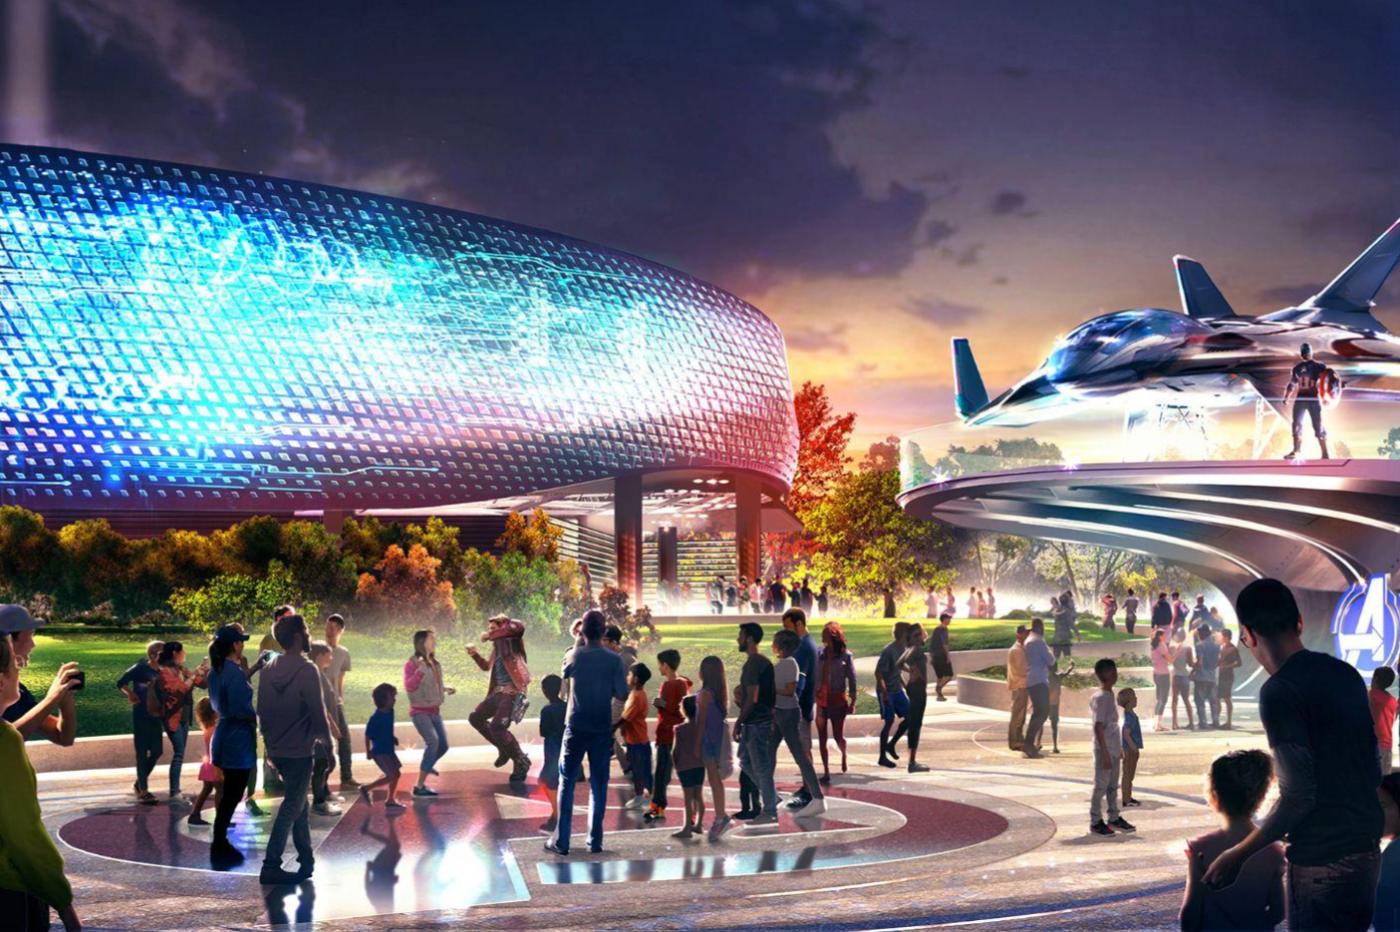 Concept art of the future avengers campus at disneyland paris showing the iron man attraction and the Quinjet platform